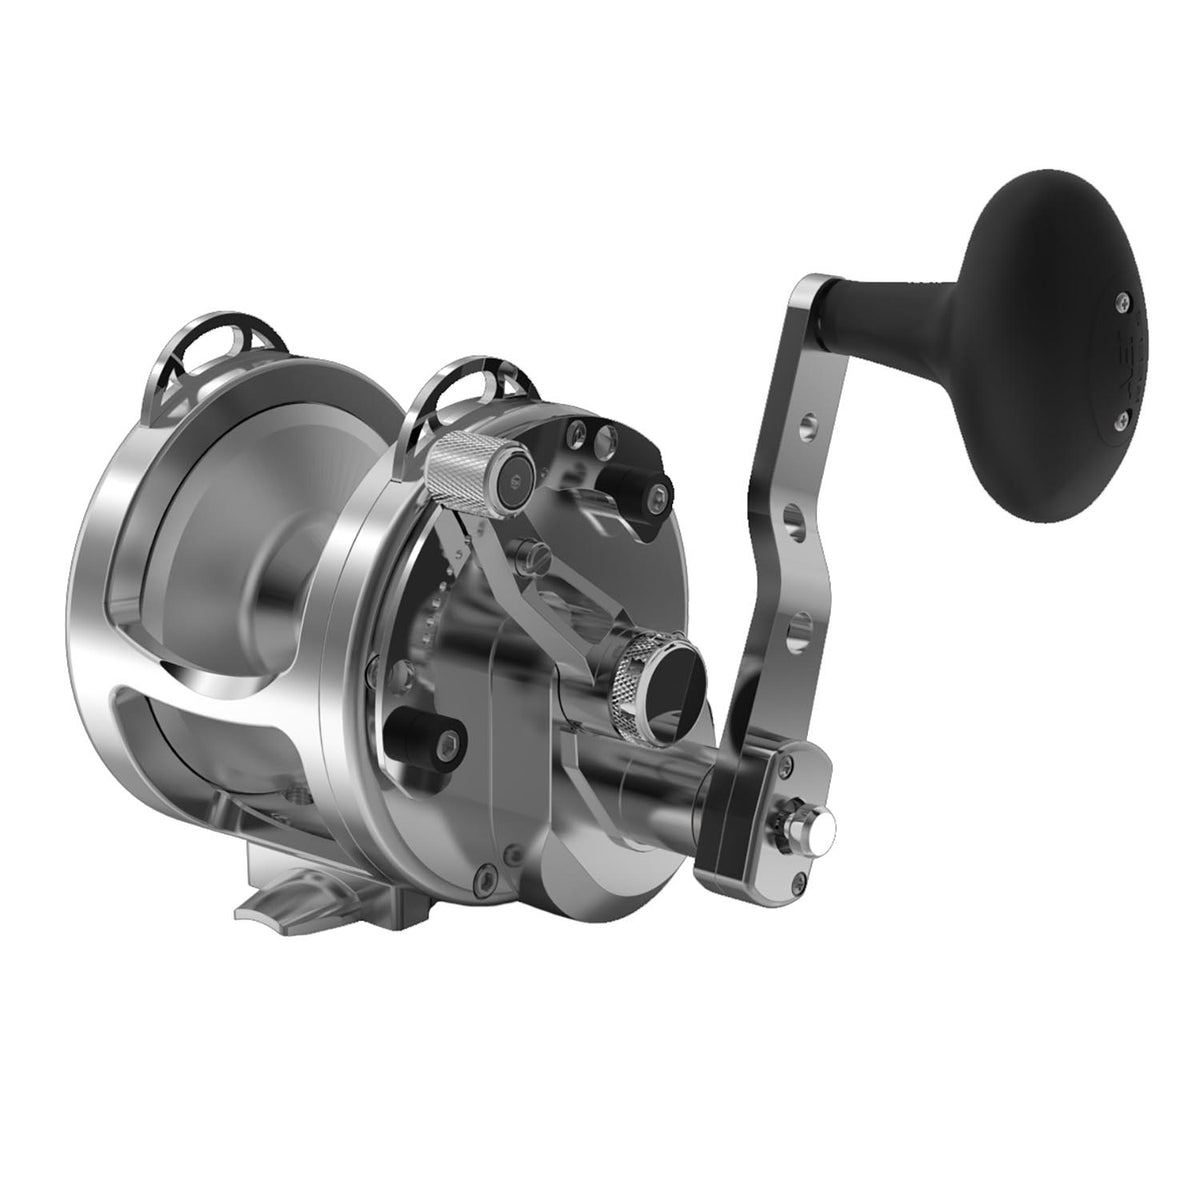 Avet HX 5/2 Raptor Non-MC Two Speed Reel - Silver - Right-Hand